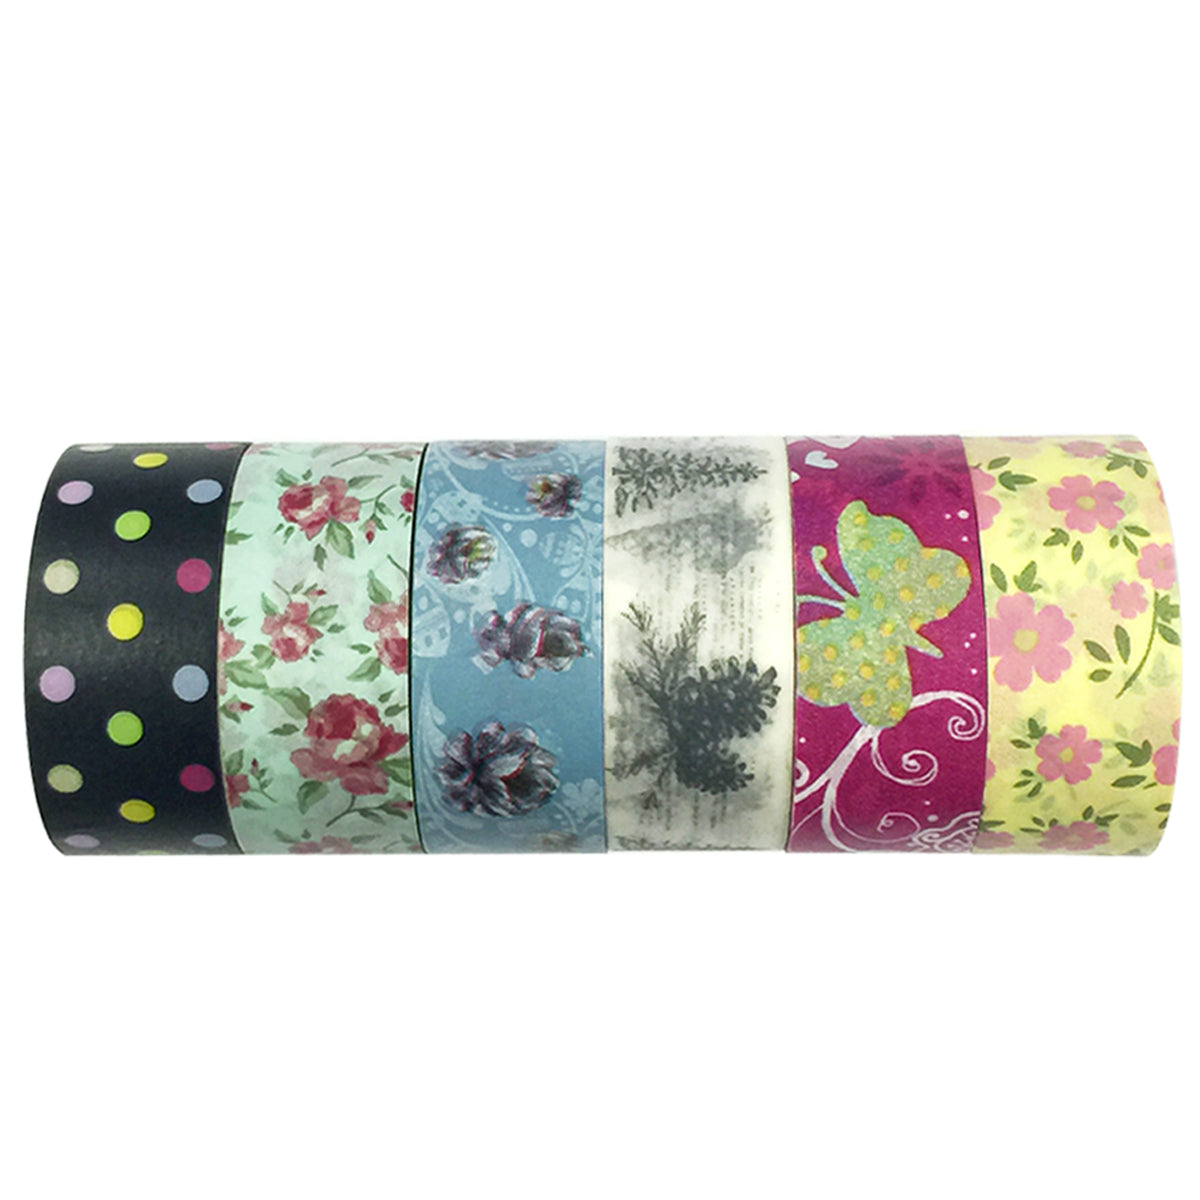 Wrapables Washi Tapes Masking Tapes 10M L x 20mm W, Set of 6, Daydream